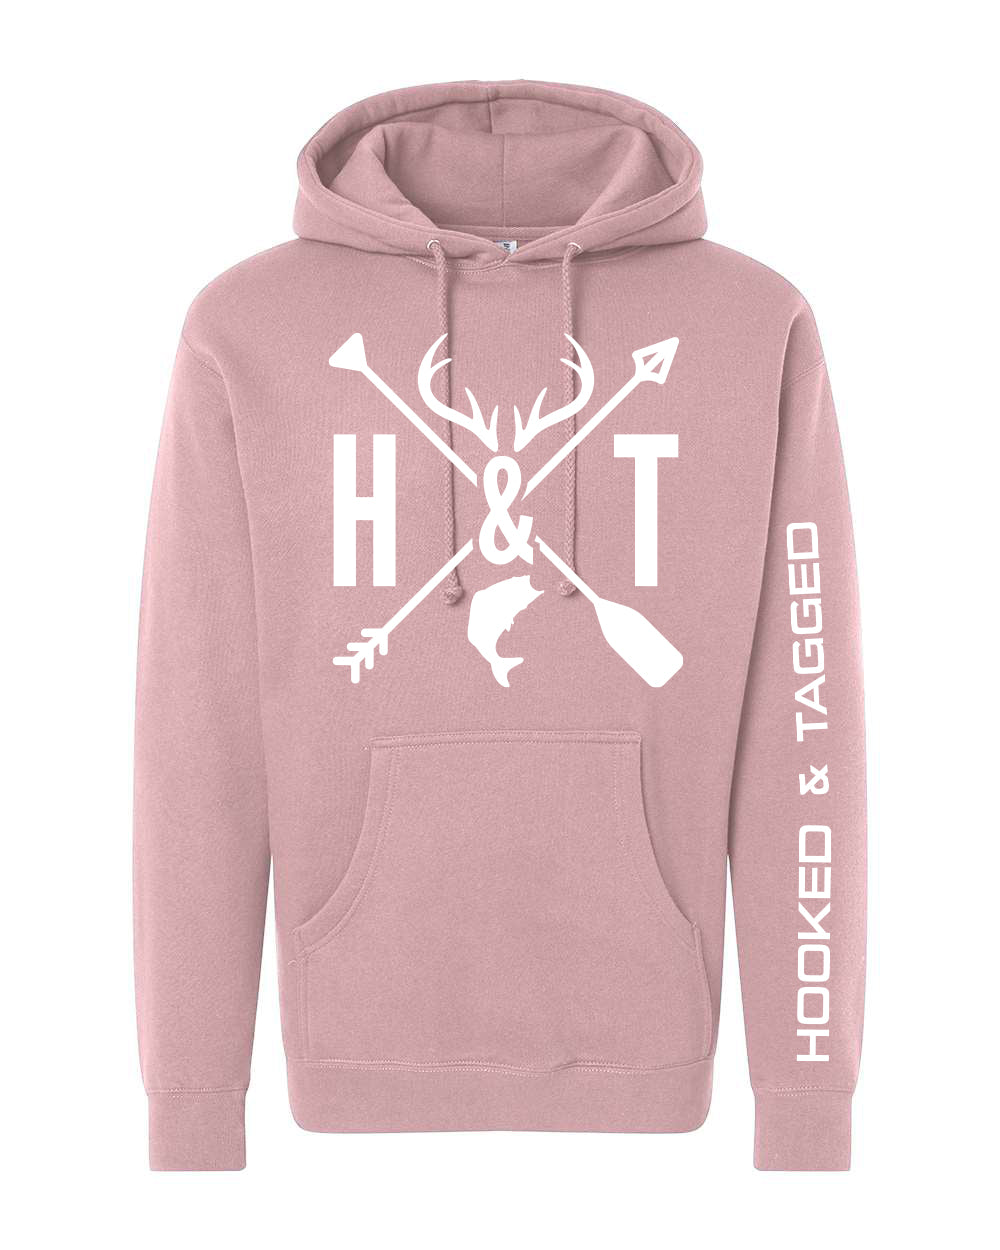 Fish & Game Hoodie Dusty Pink / XX-Large